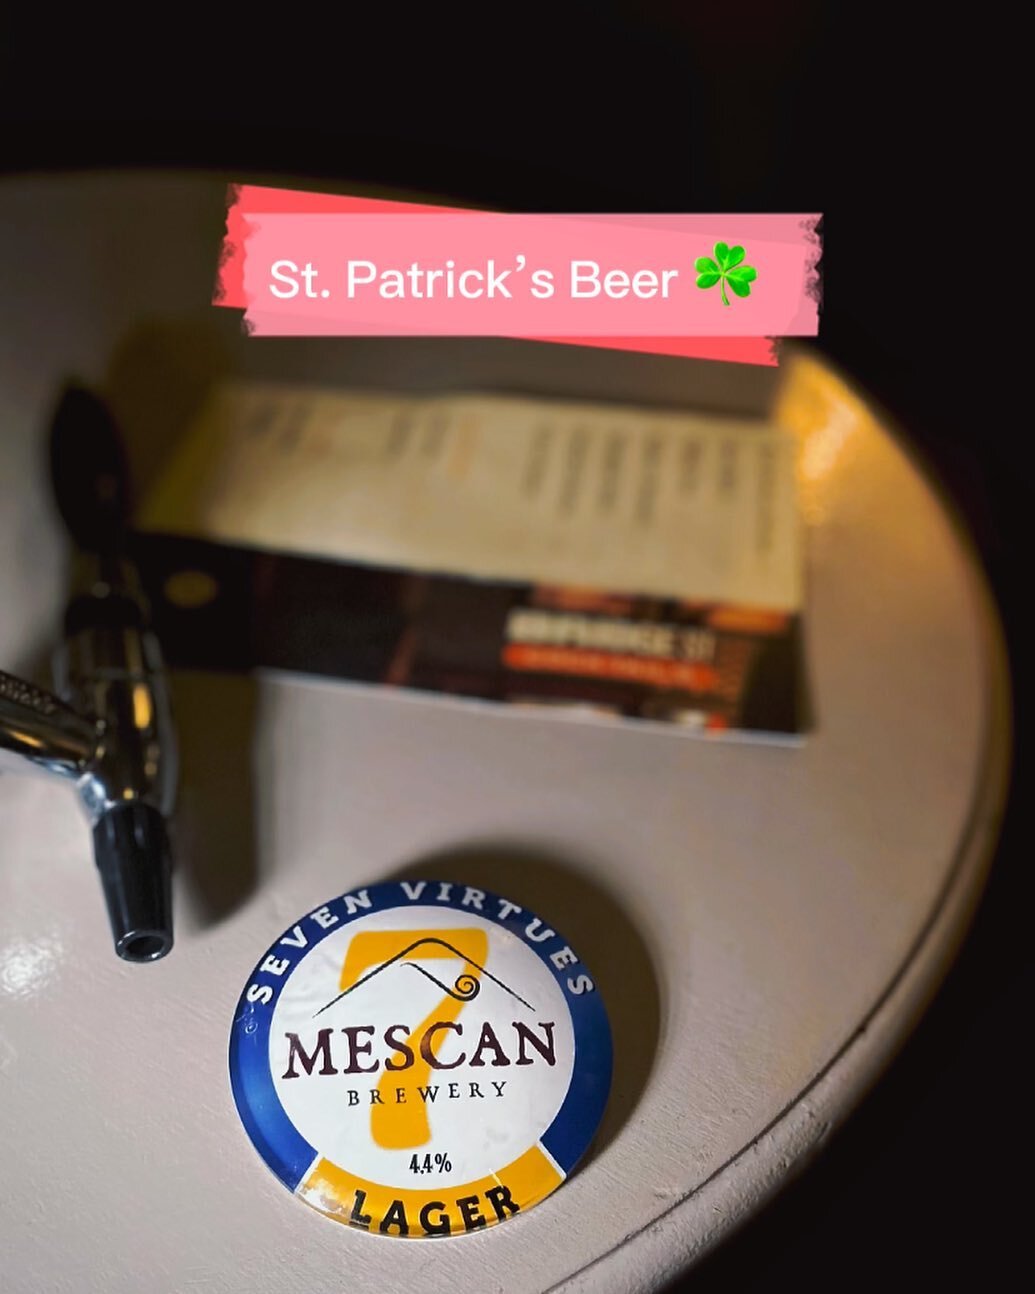 📢This Friday from 5:30-7:30pm📢

Cillian from Mescan Brewery will be here to put Mescan on tap🍻 

Located on the sacred slopes of Croagh Patrick, this beer pays homage to St. Patrick&rsquo;s personal brewer. 🇮🇪

Legend has it that his beer helped